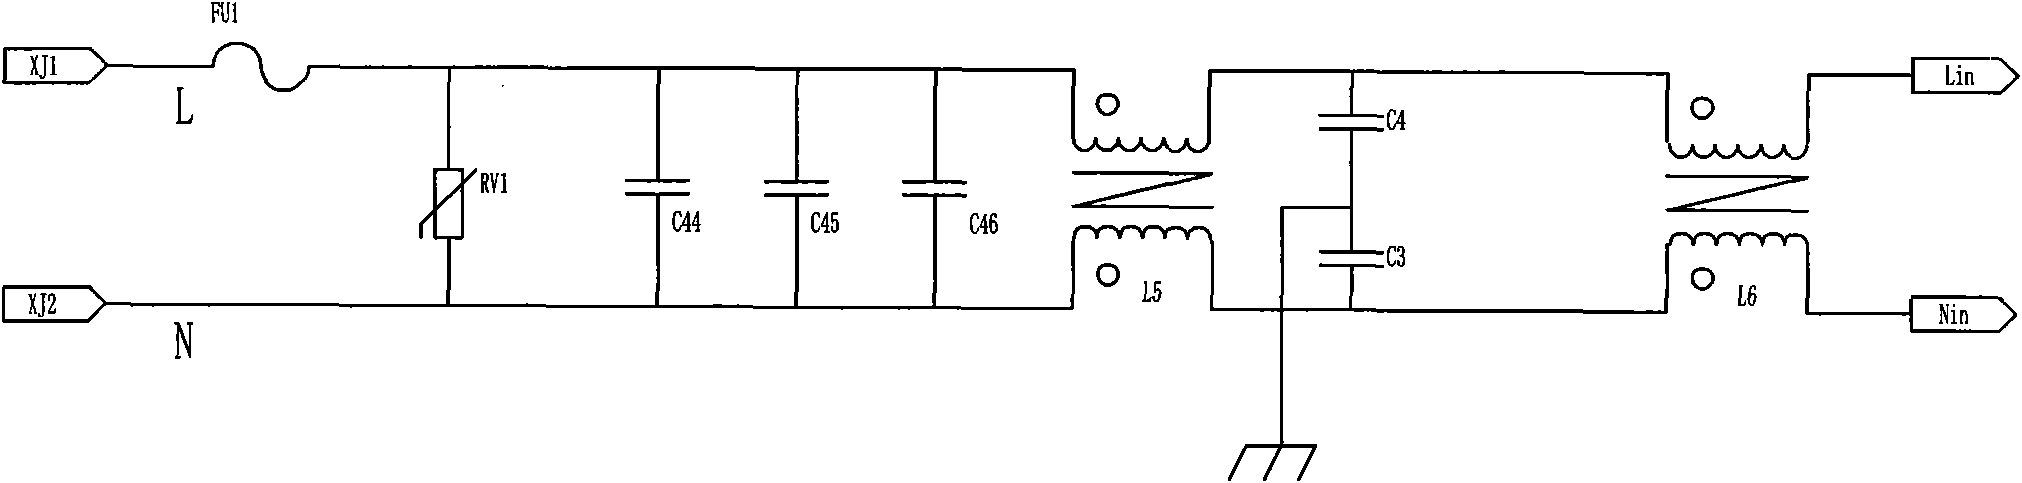 Grading limiting circuit for aerospace alternative-current/direct-current (AC/DC) converter